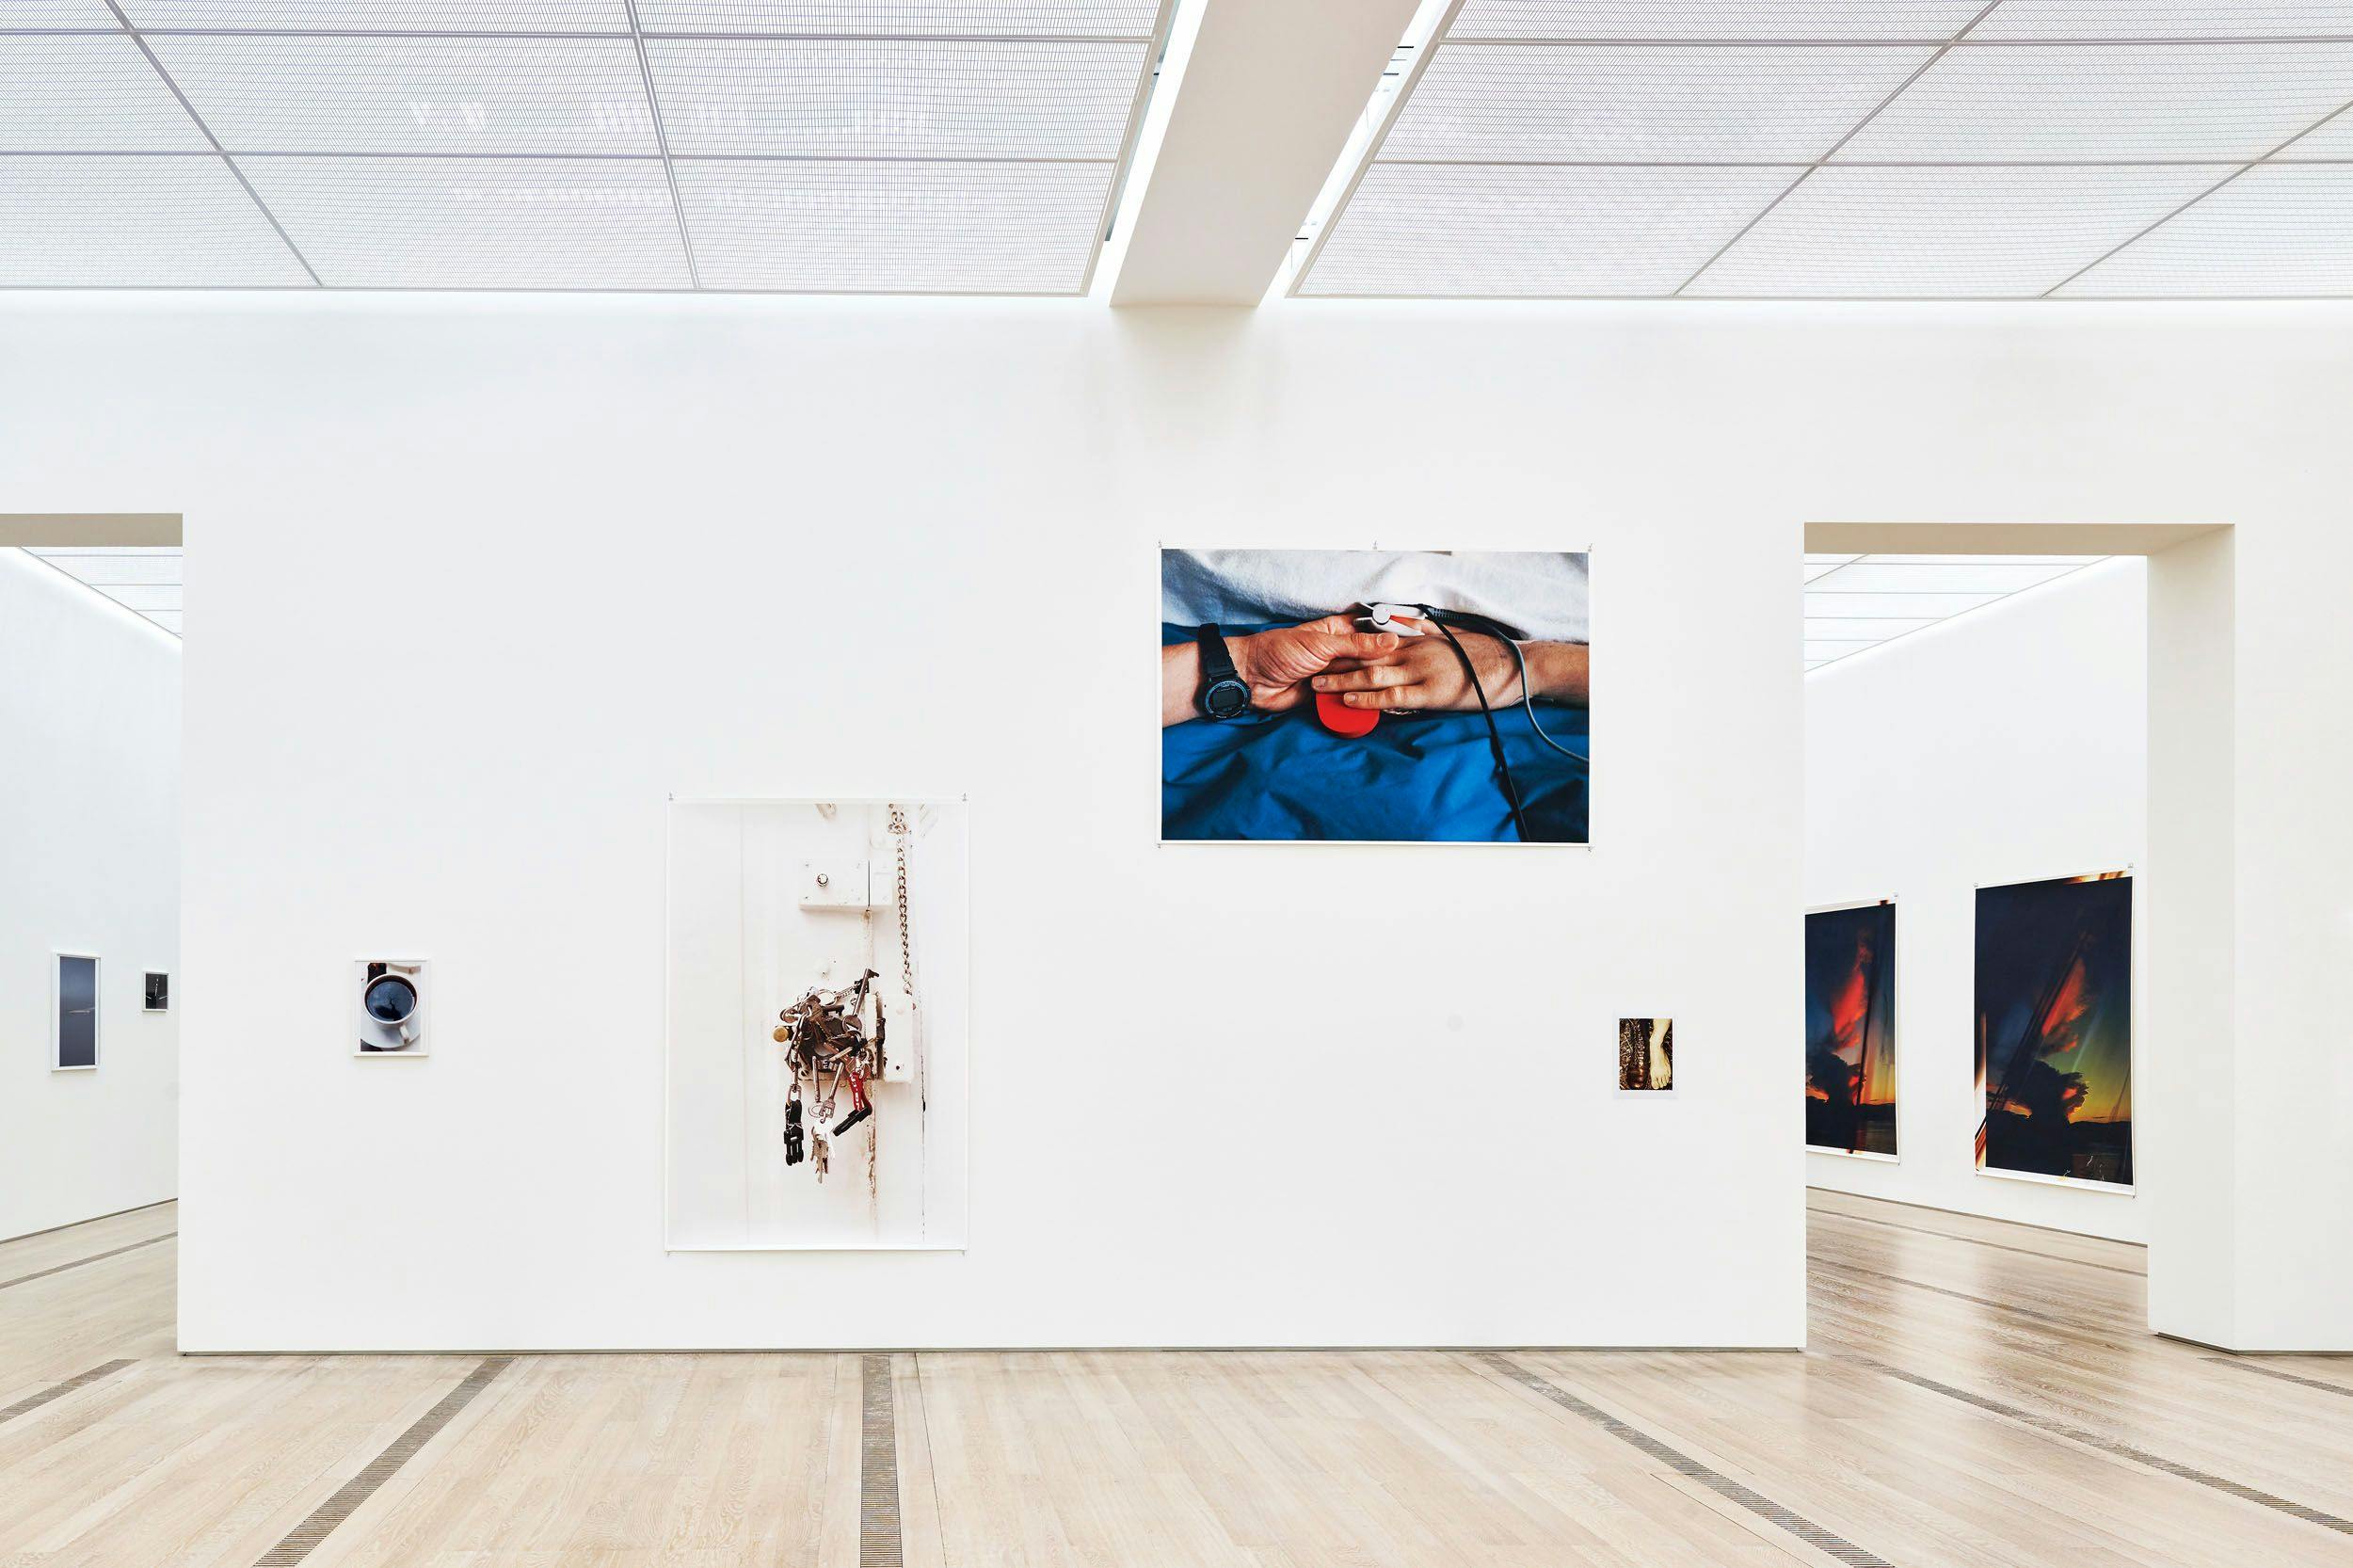 Installation view of the exhibition Wolfgang Tillmans at the Fondation Beyeler in Basel, Switzerland, dated 2017.